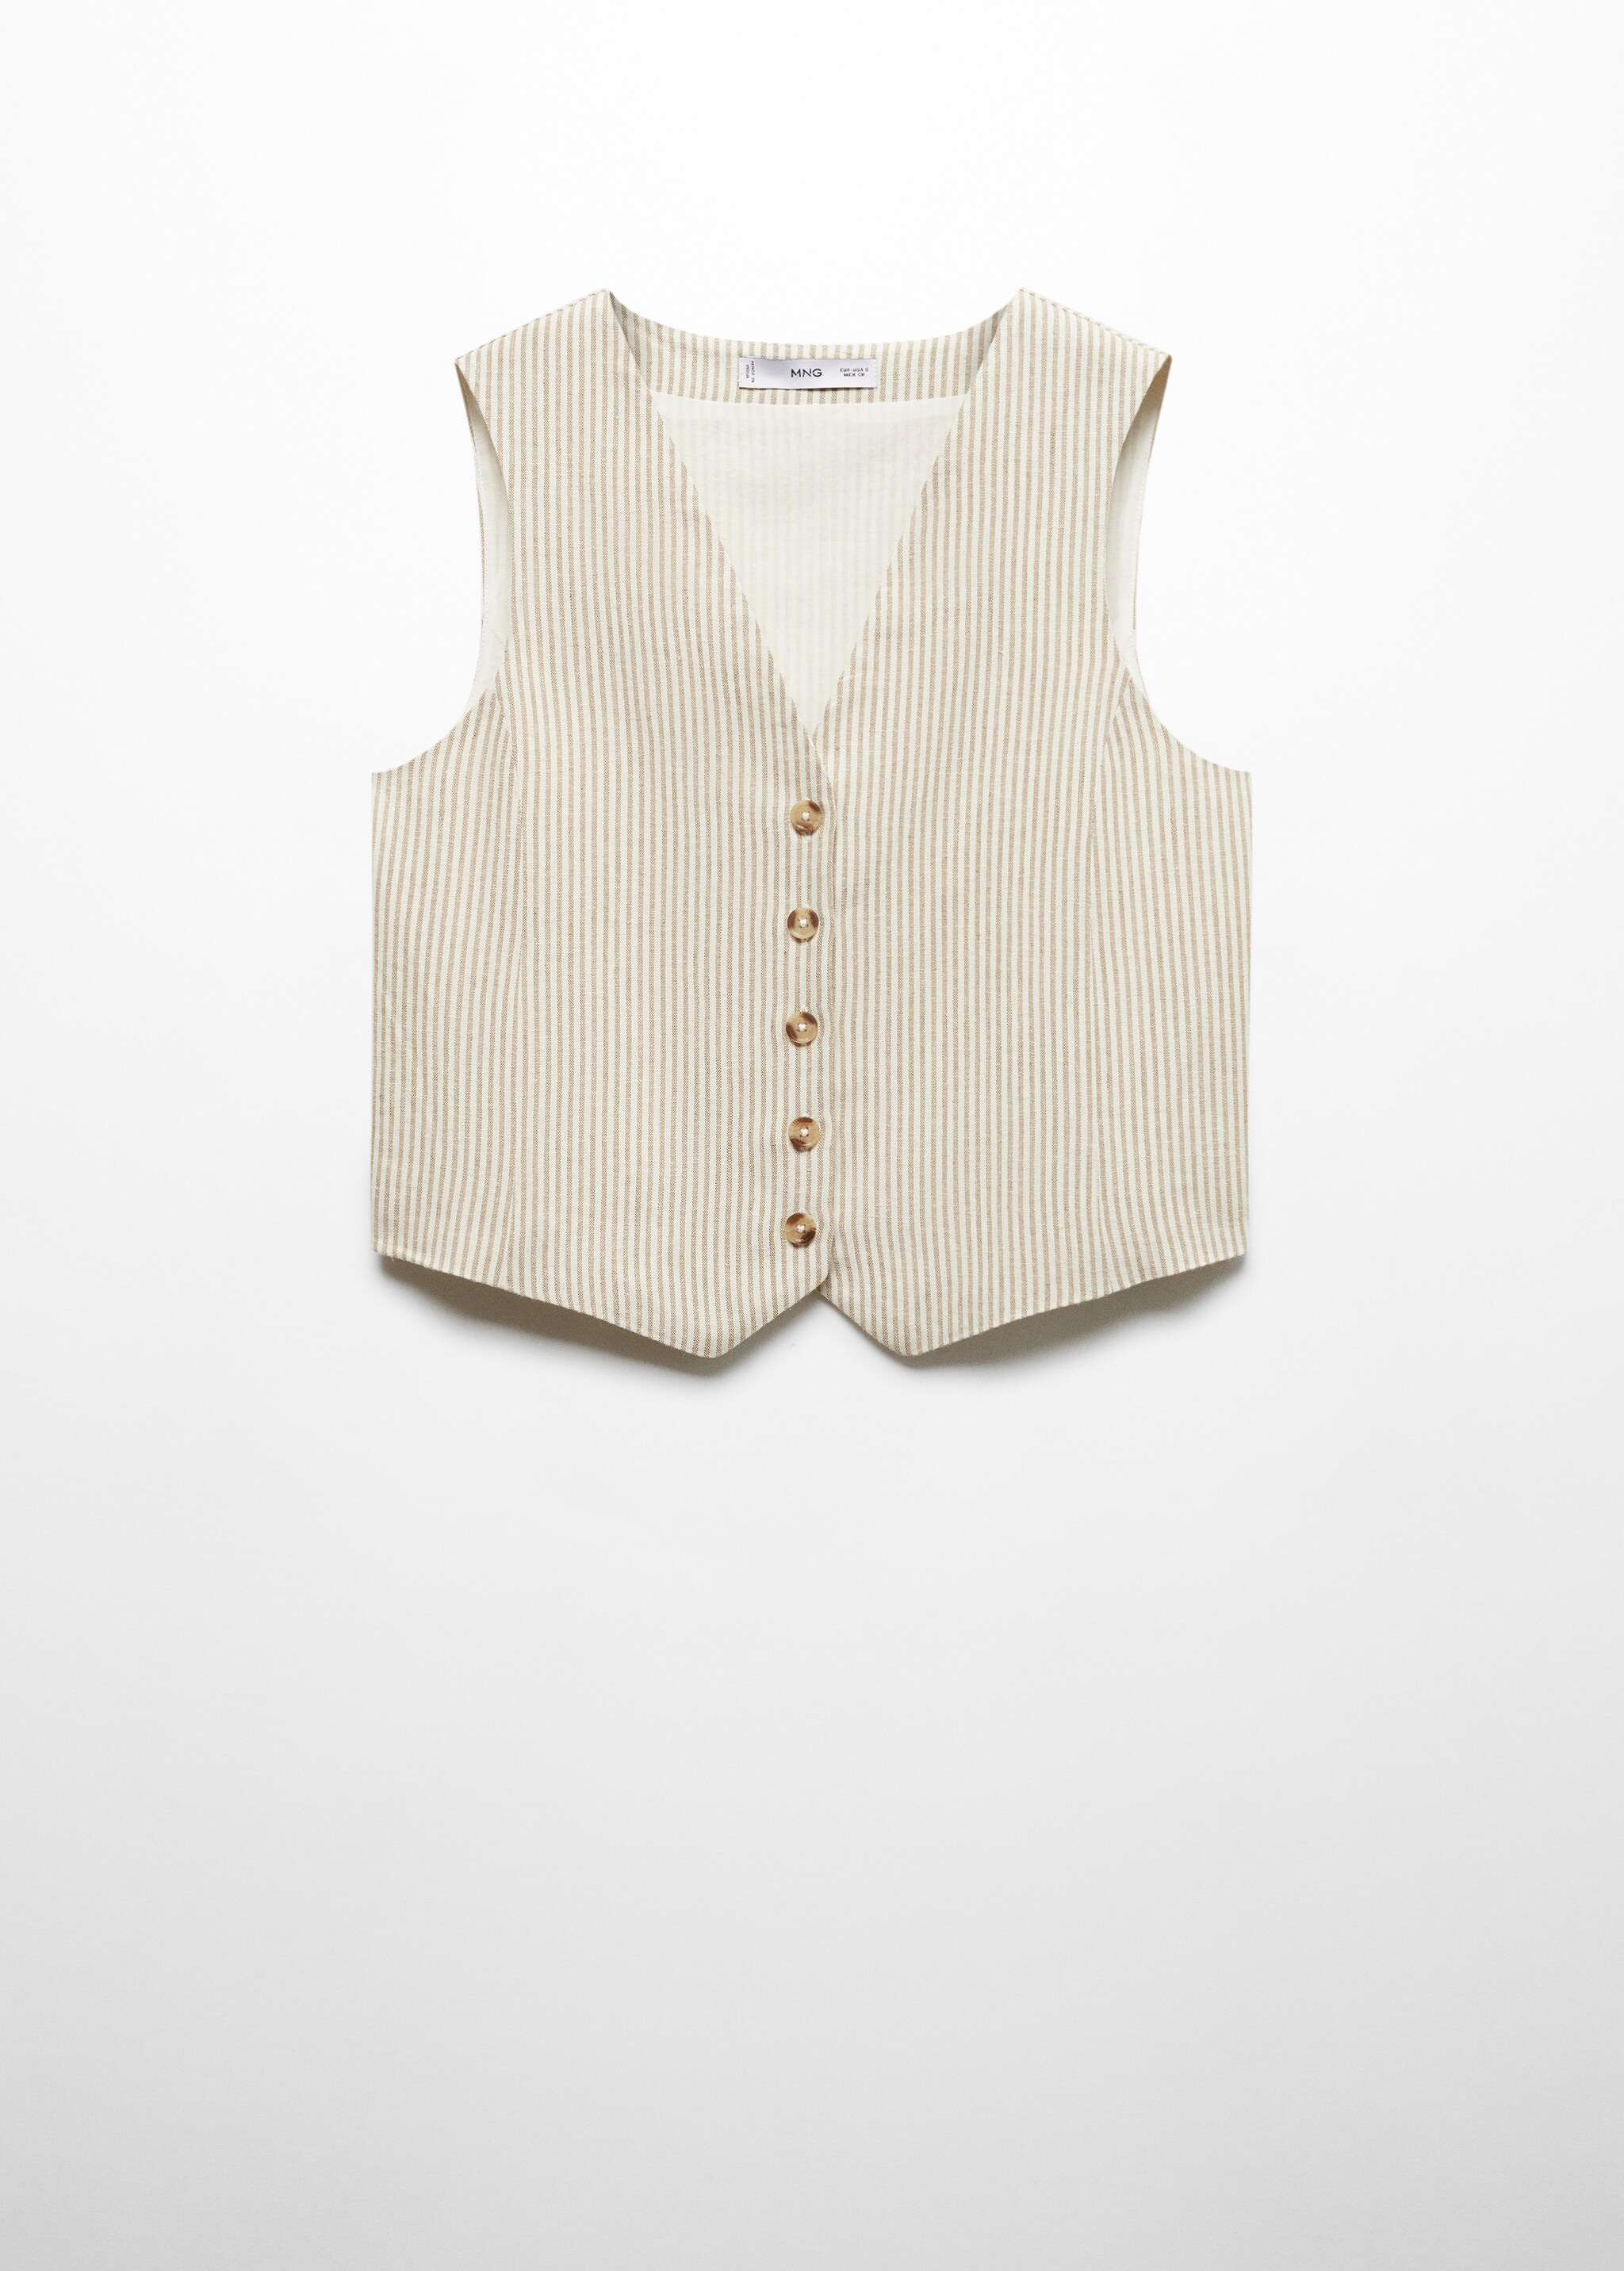 Striped linen waistcoat - Article without model